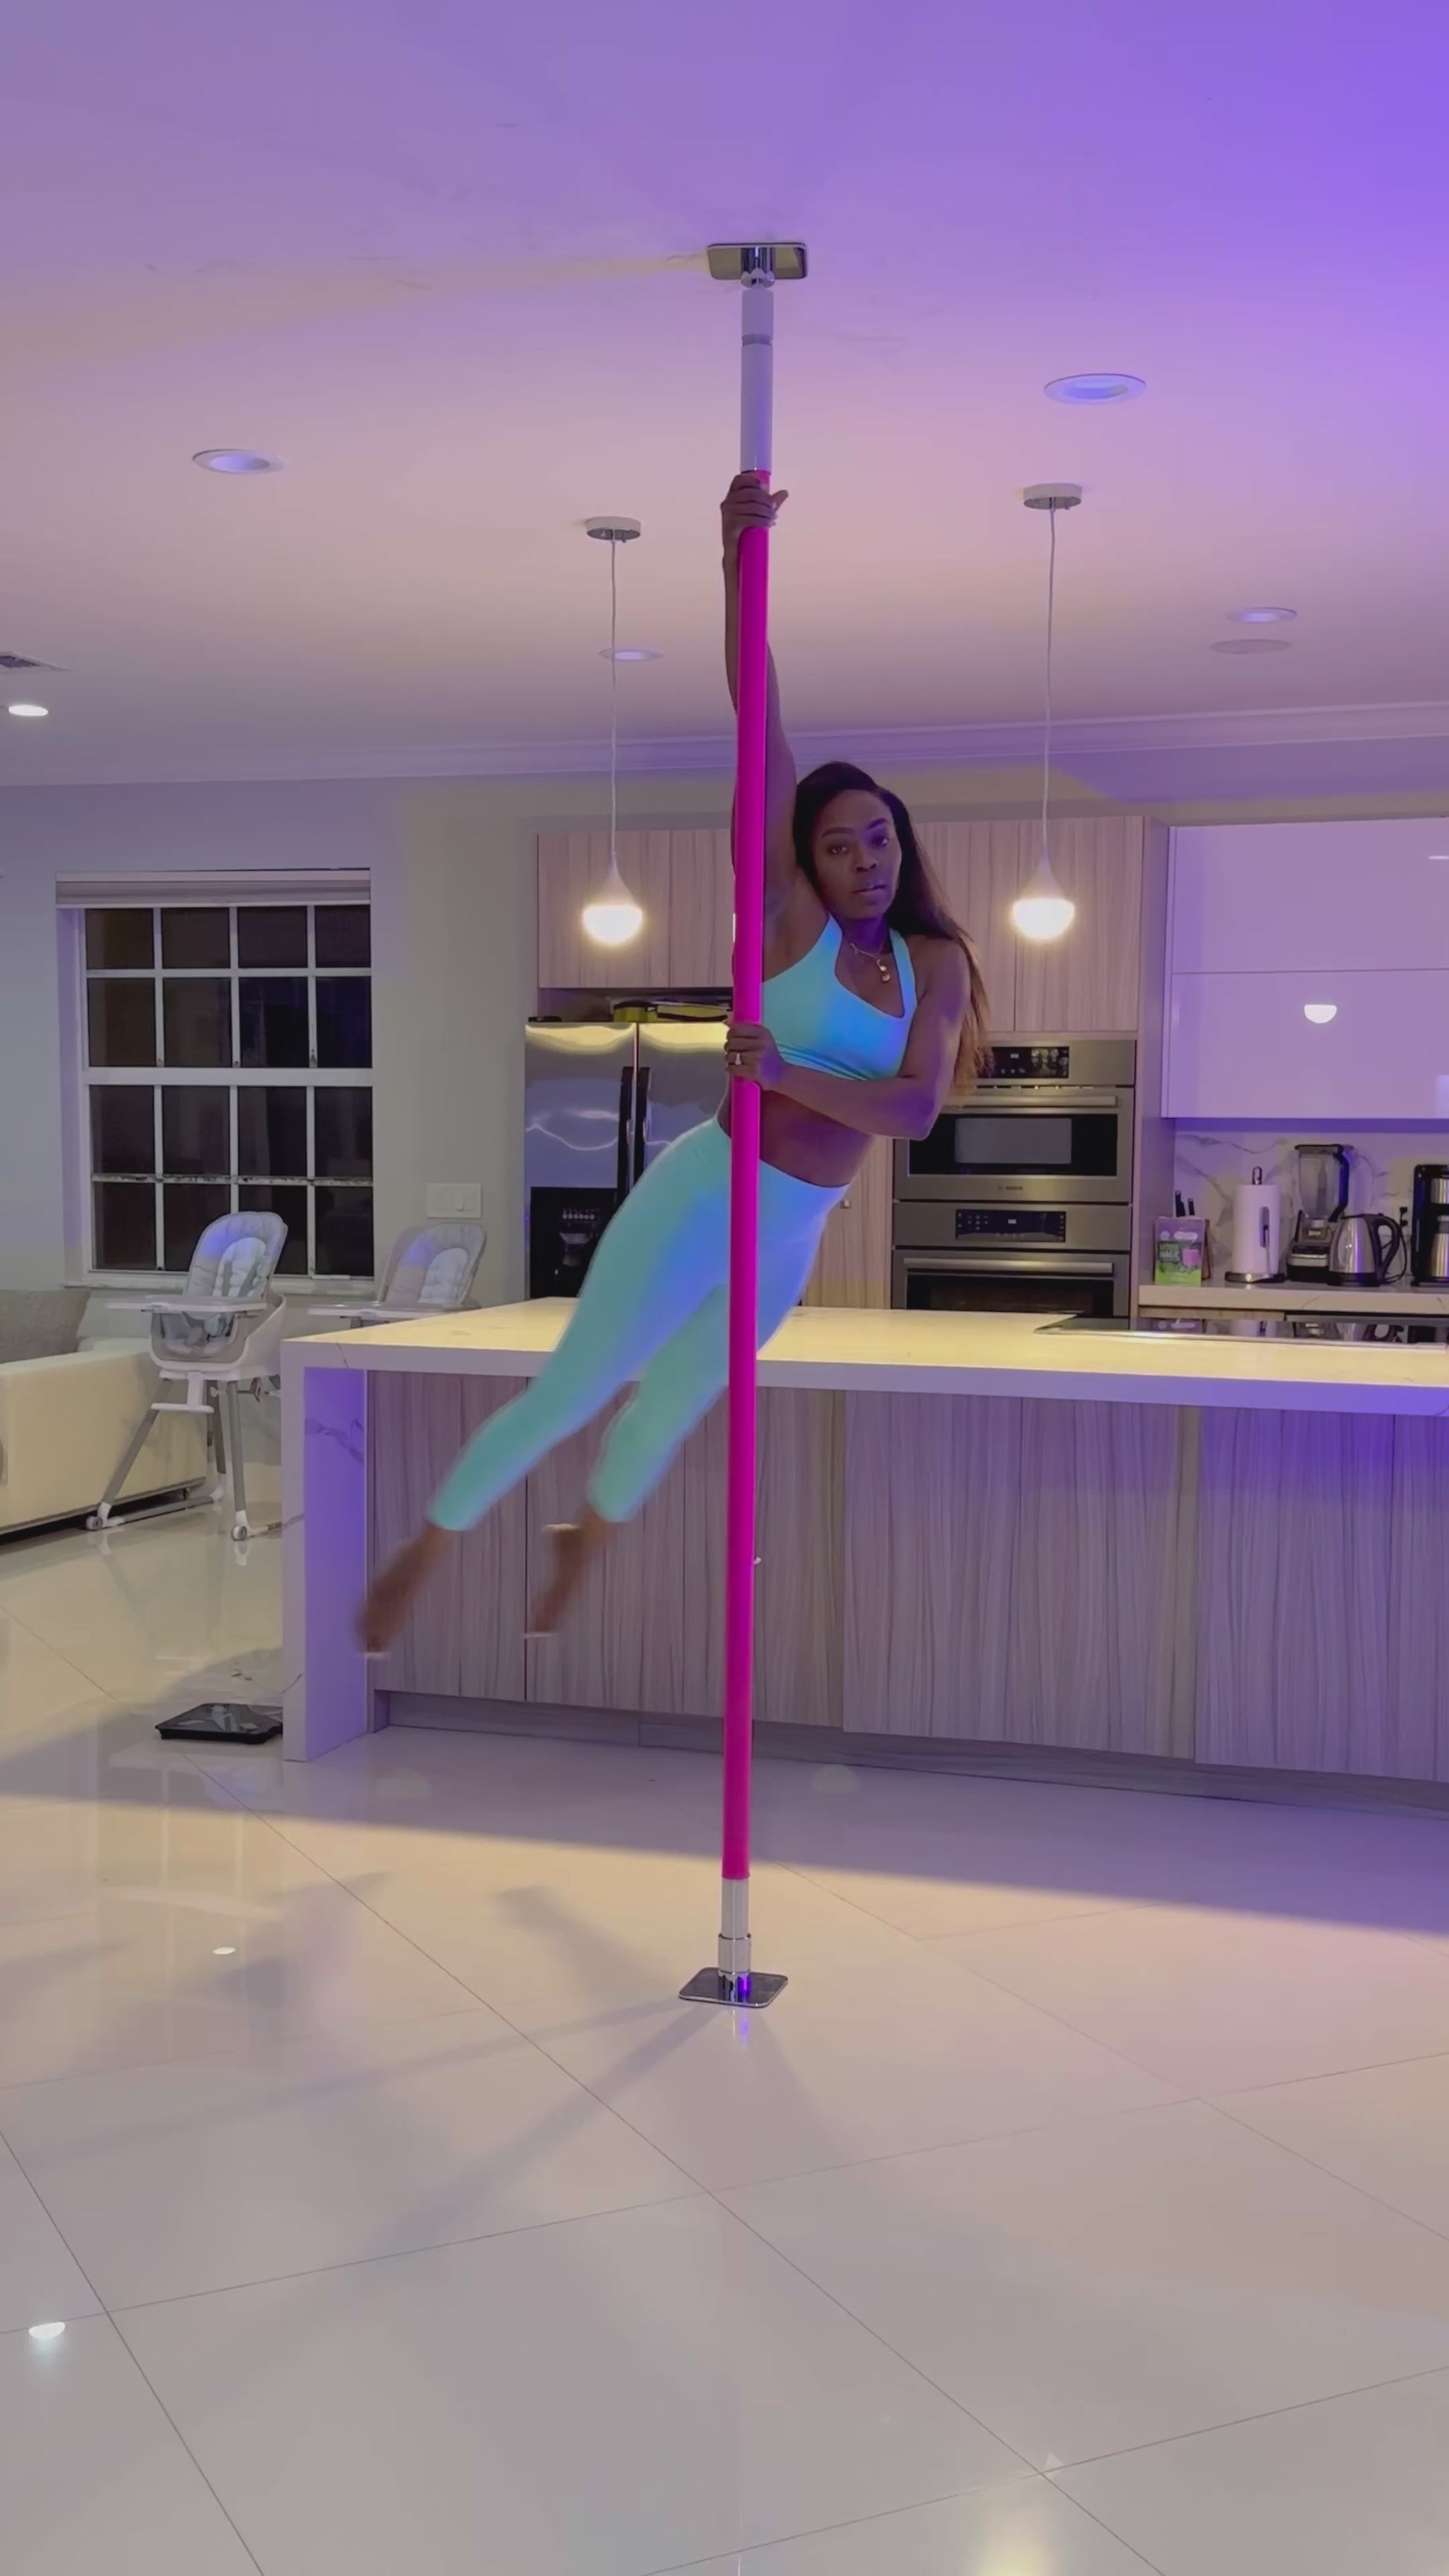 4 reasons why you must opt for pole dancing as fitness regime